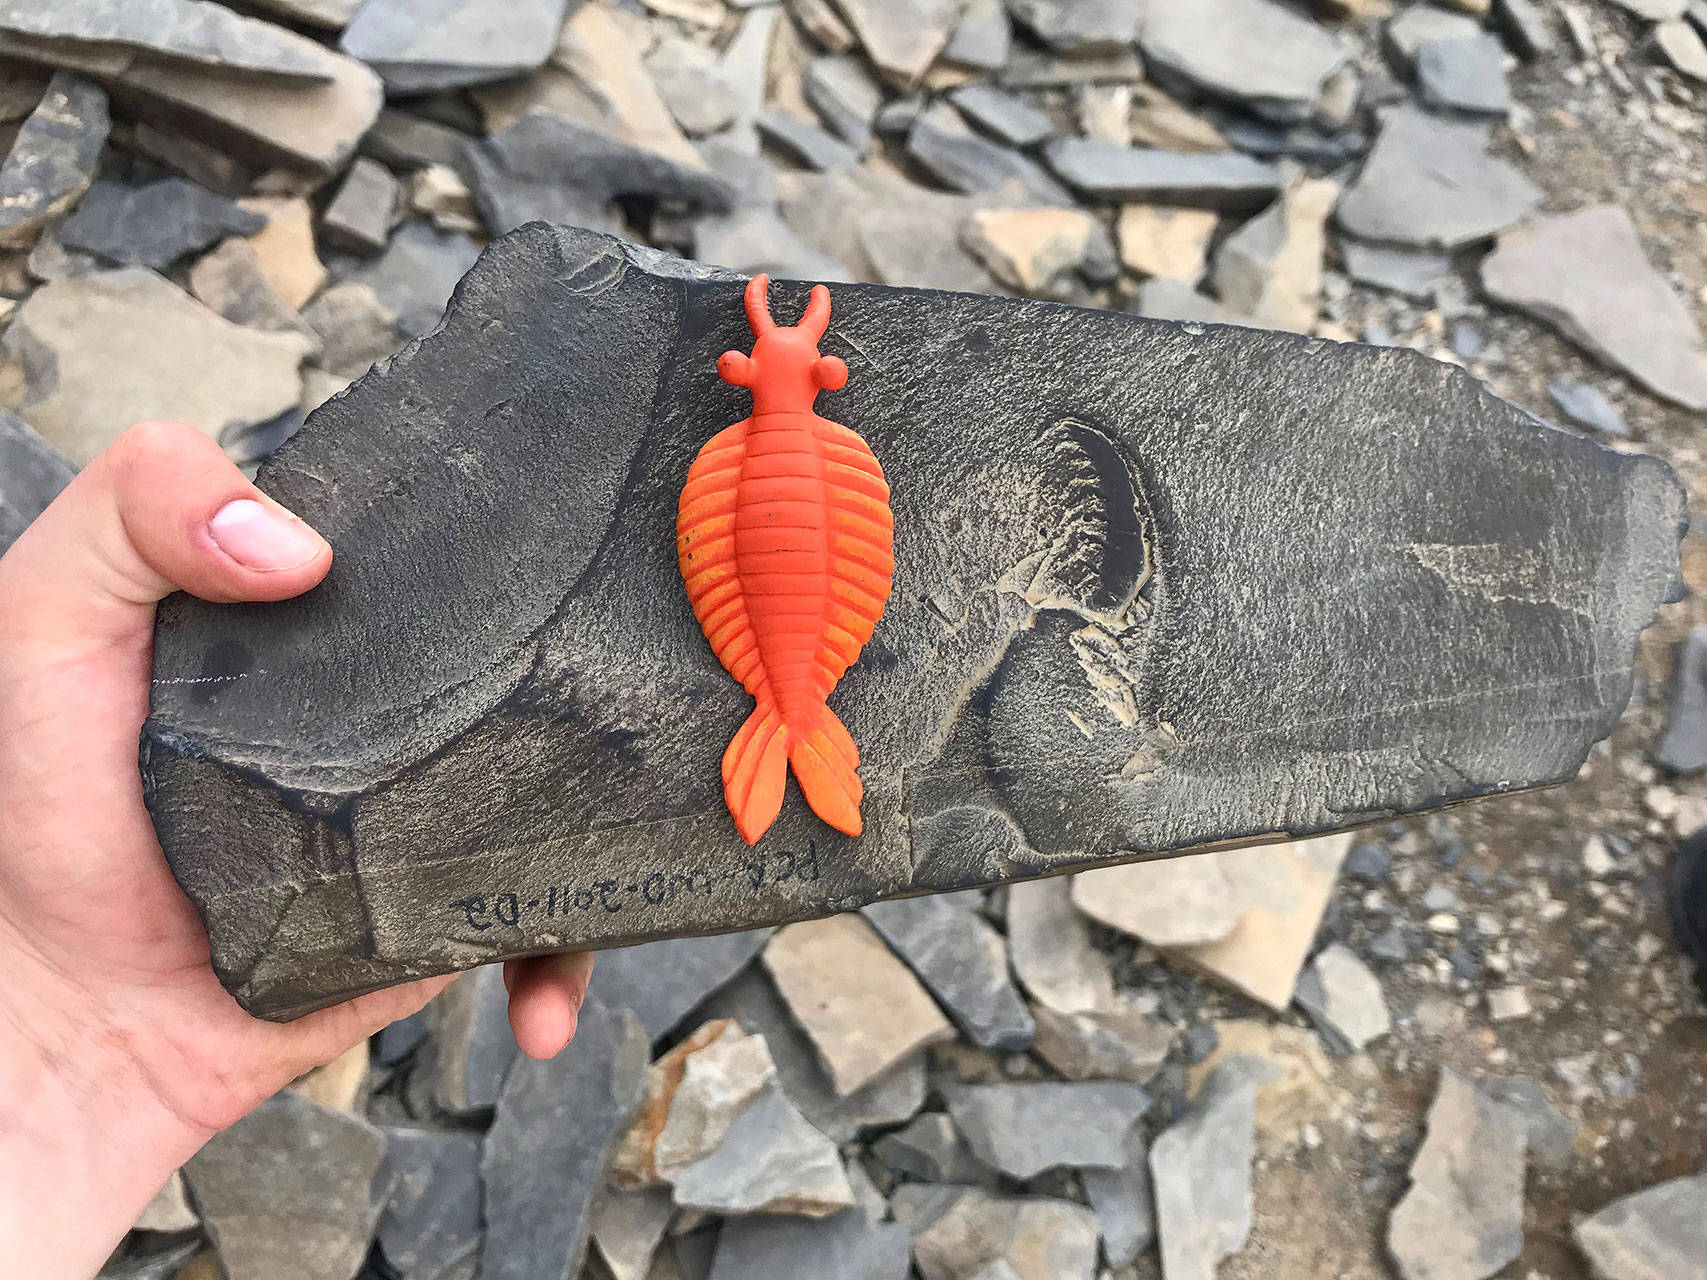 A fossil of Anomalocaris, or abnormal shrimp, at the Burgess Shale site in the Canadian Rockies, where numerous fossils as old as 508 million years can be found. The orange toy is a replica of what the creature might have looked like.